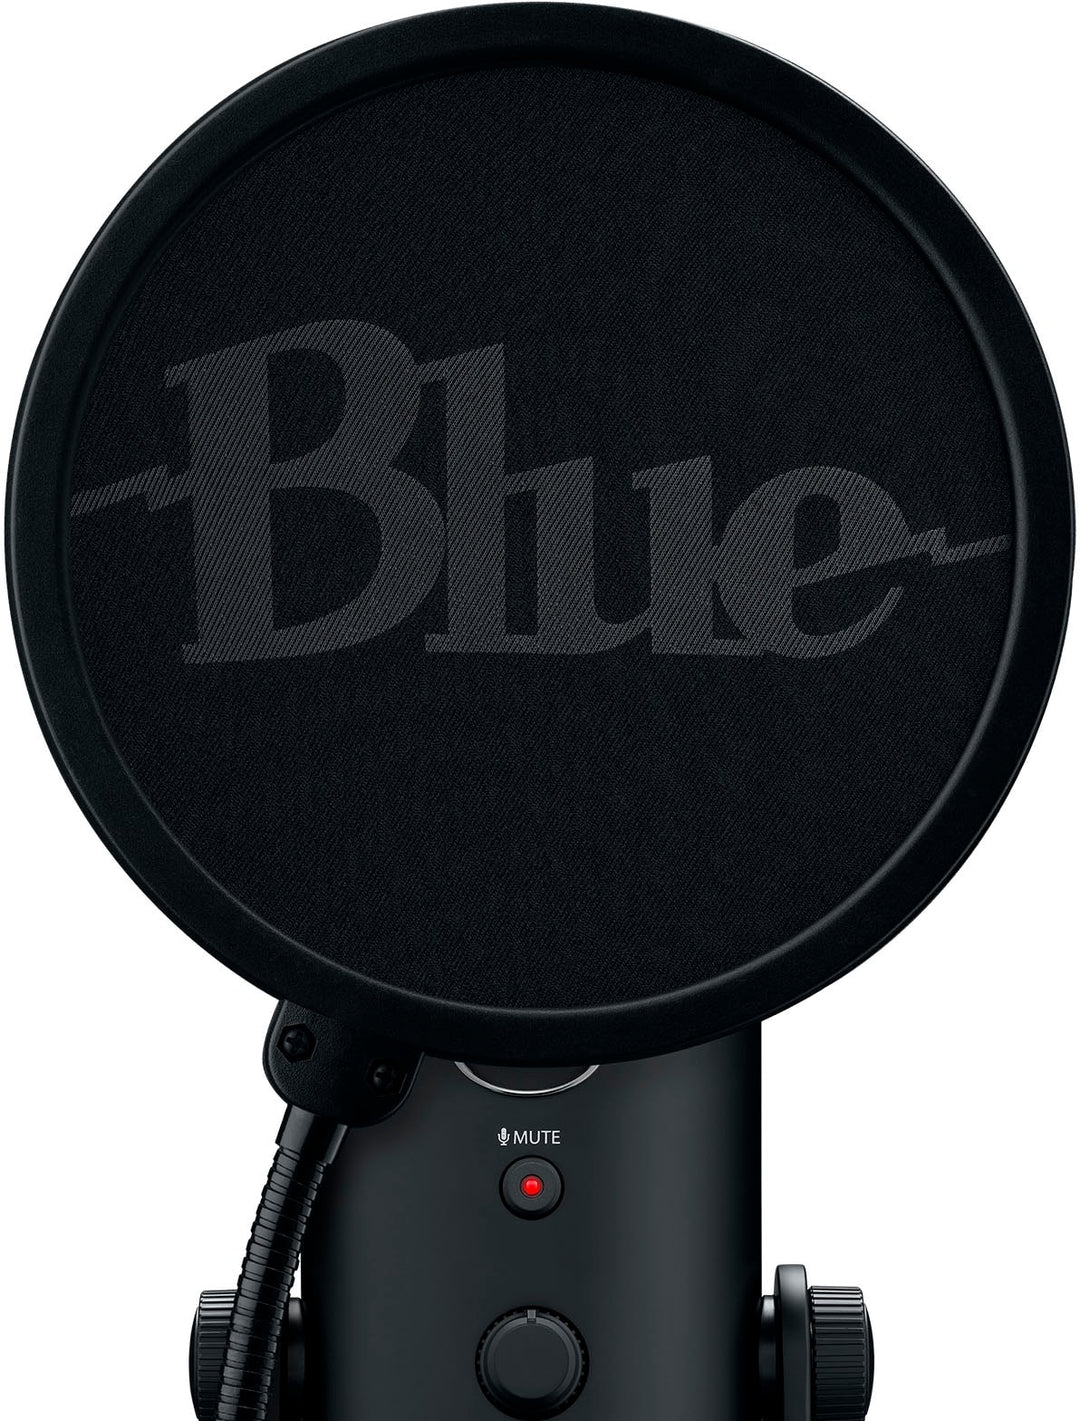 Logitech - Blue Yeti Game Streaming USB Condenser Microphone Kit with Blue VO!CE, Exclusive Streamlabs Themes, Custom Pop Filter_3